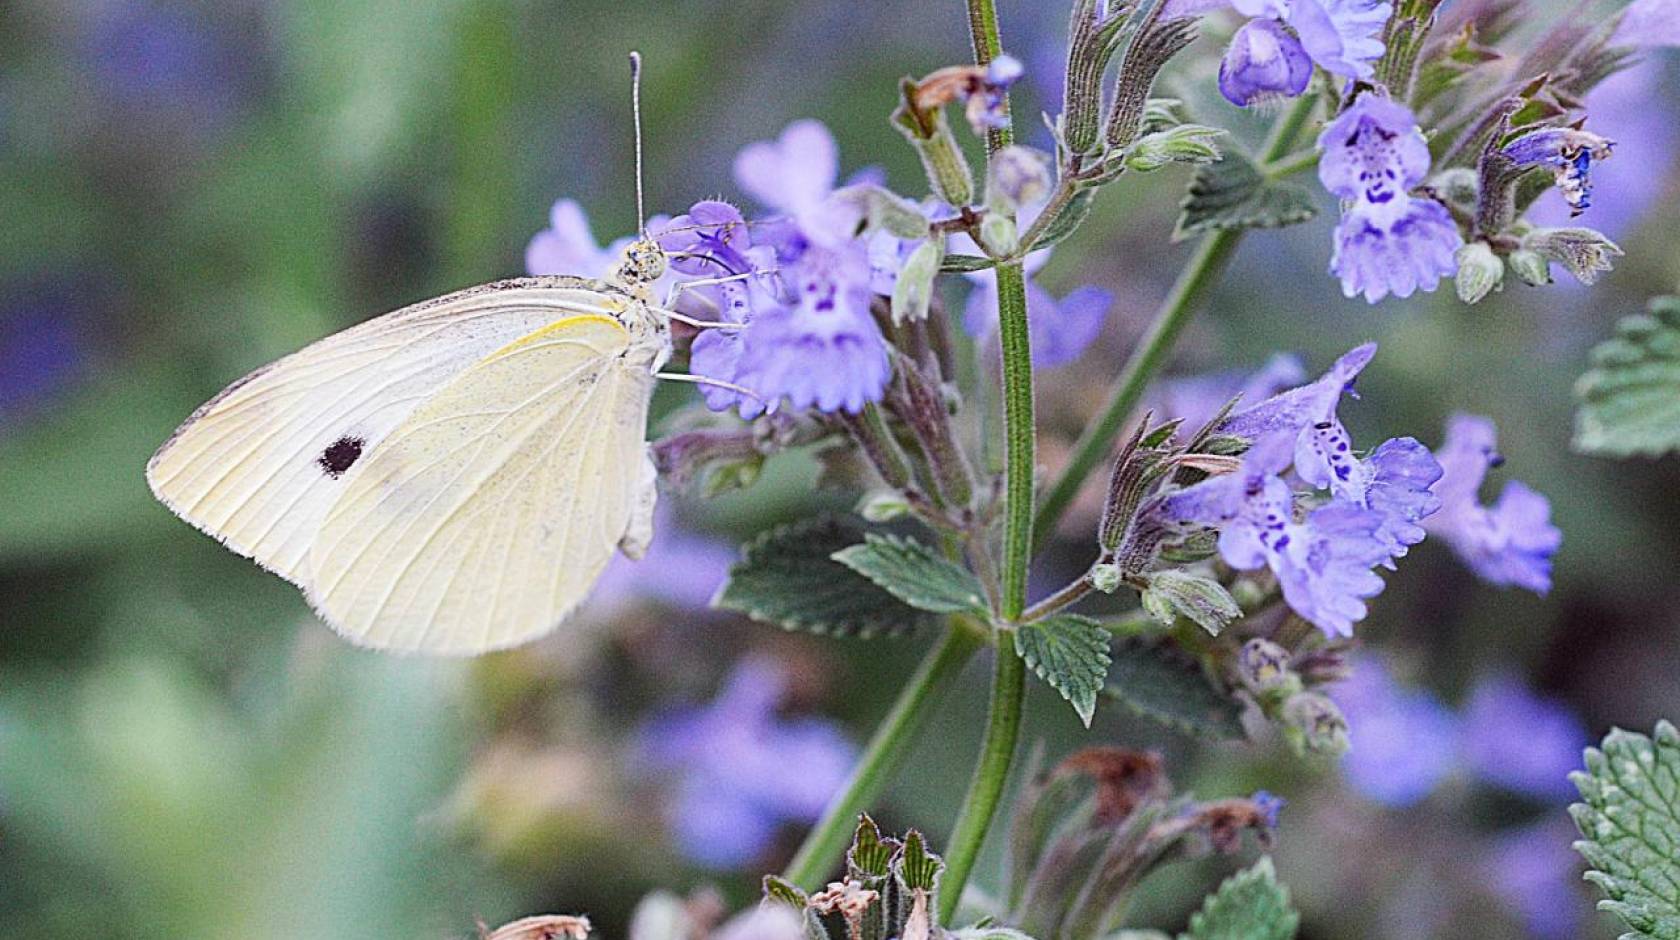 Cabbage white butterfly on lilac-colored flowers